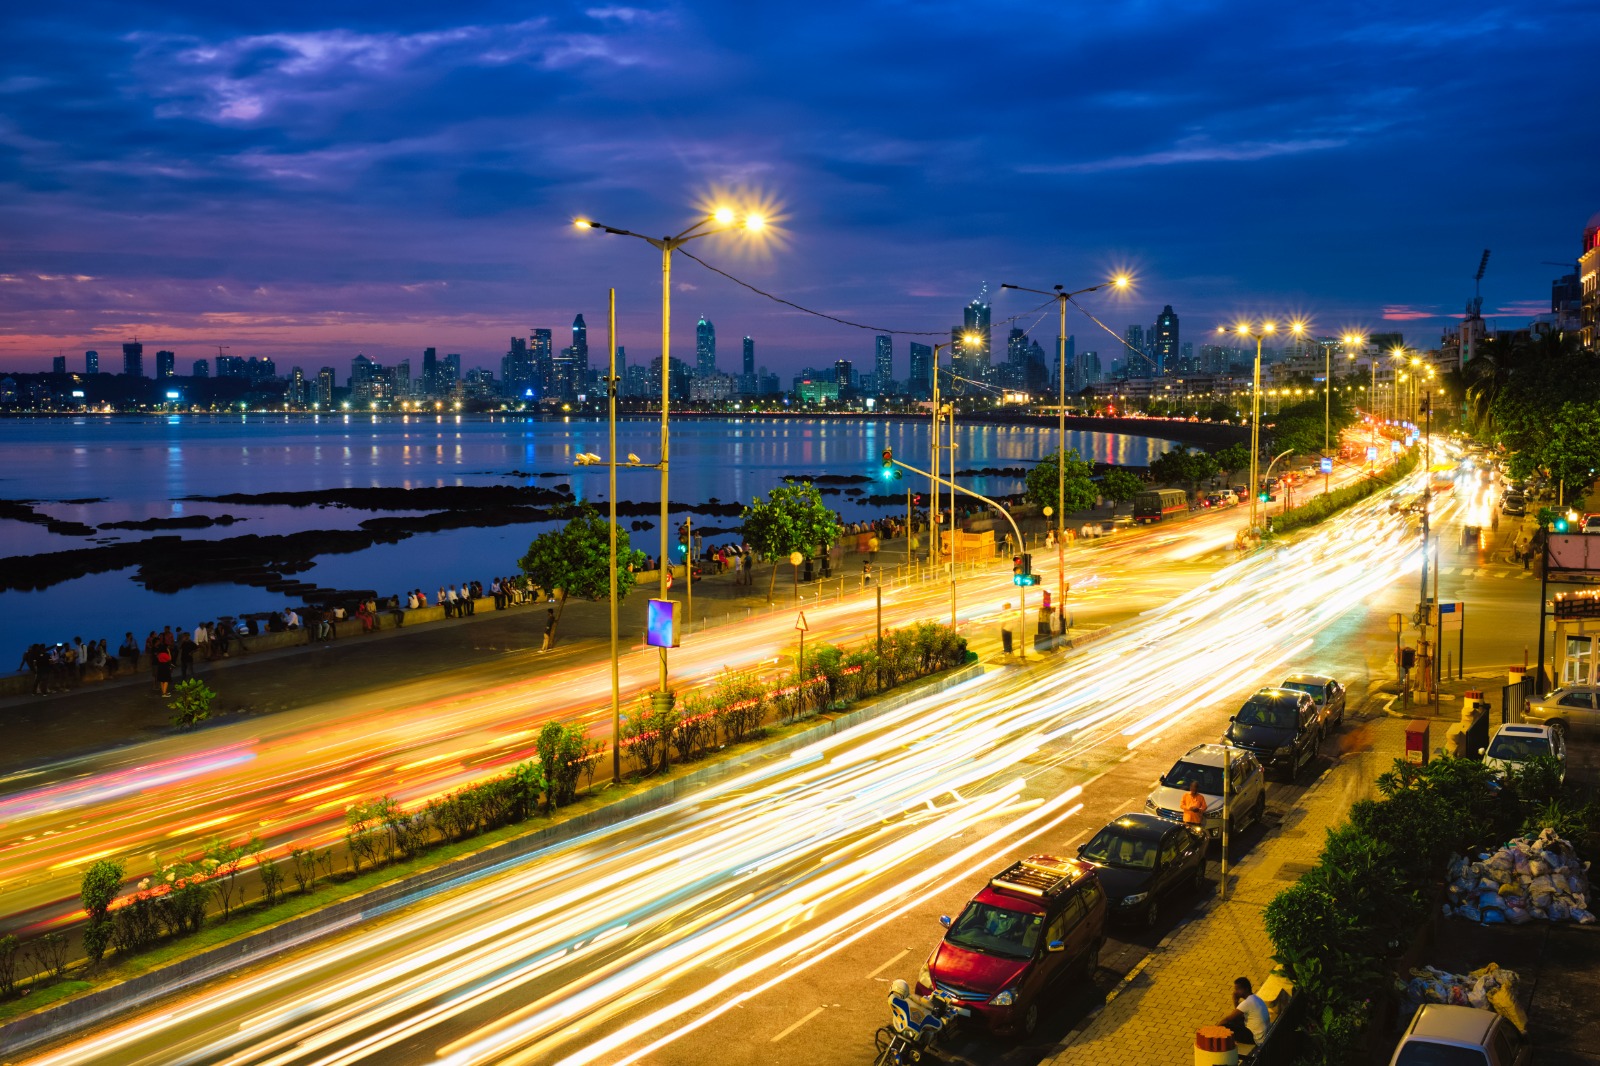 Mumbai's iconic tourist attraction - Queen's Necklace Marine drive at night. Mumbai, Maharashtra, India. Mumbai and Chennai are still the leading destinations for Data Centres as they continue to have the best policies and understanding of the market, while also offering ample power supply infrastructure and services. Photo credit: f9photos | envato GRI Club. India. Data Centres. Real Estate. Infrastructure. Meeting. Conference. Mumbai.